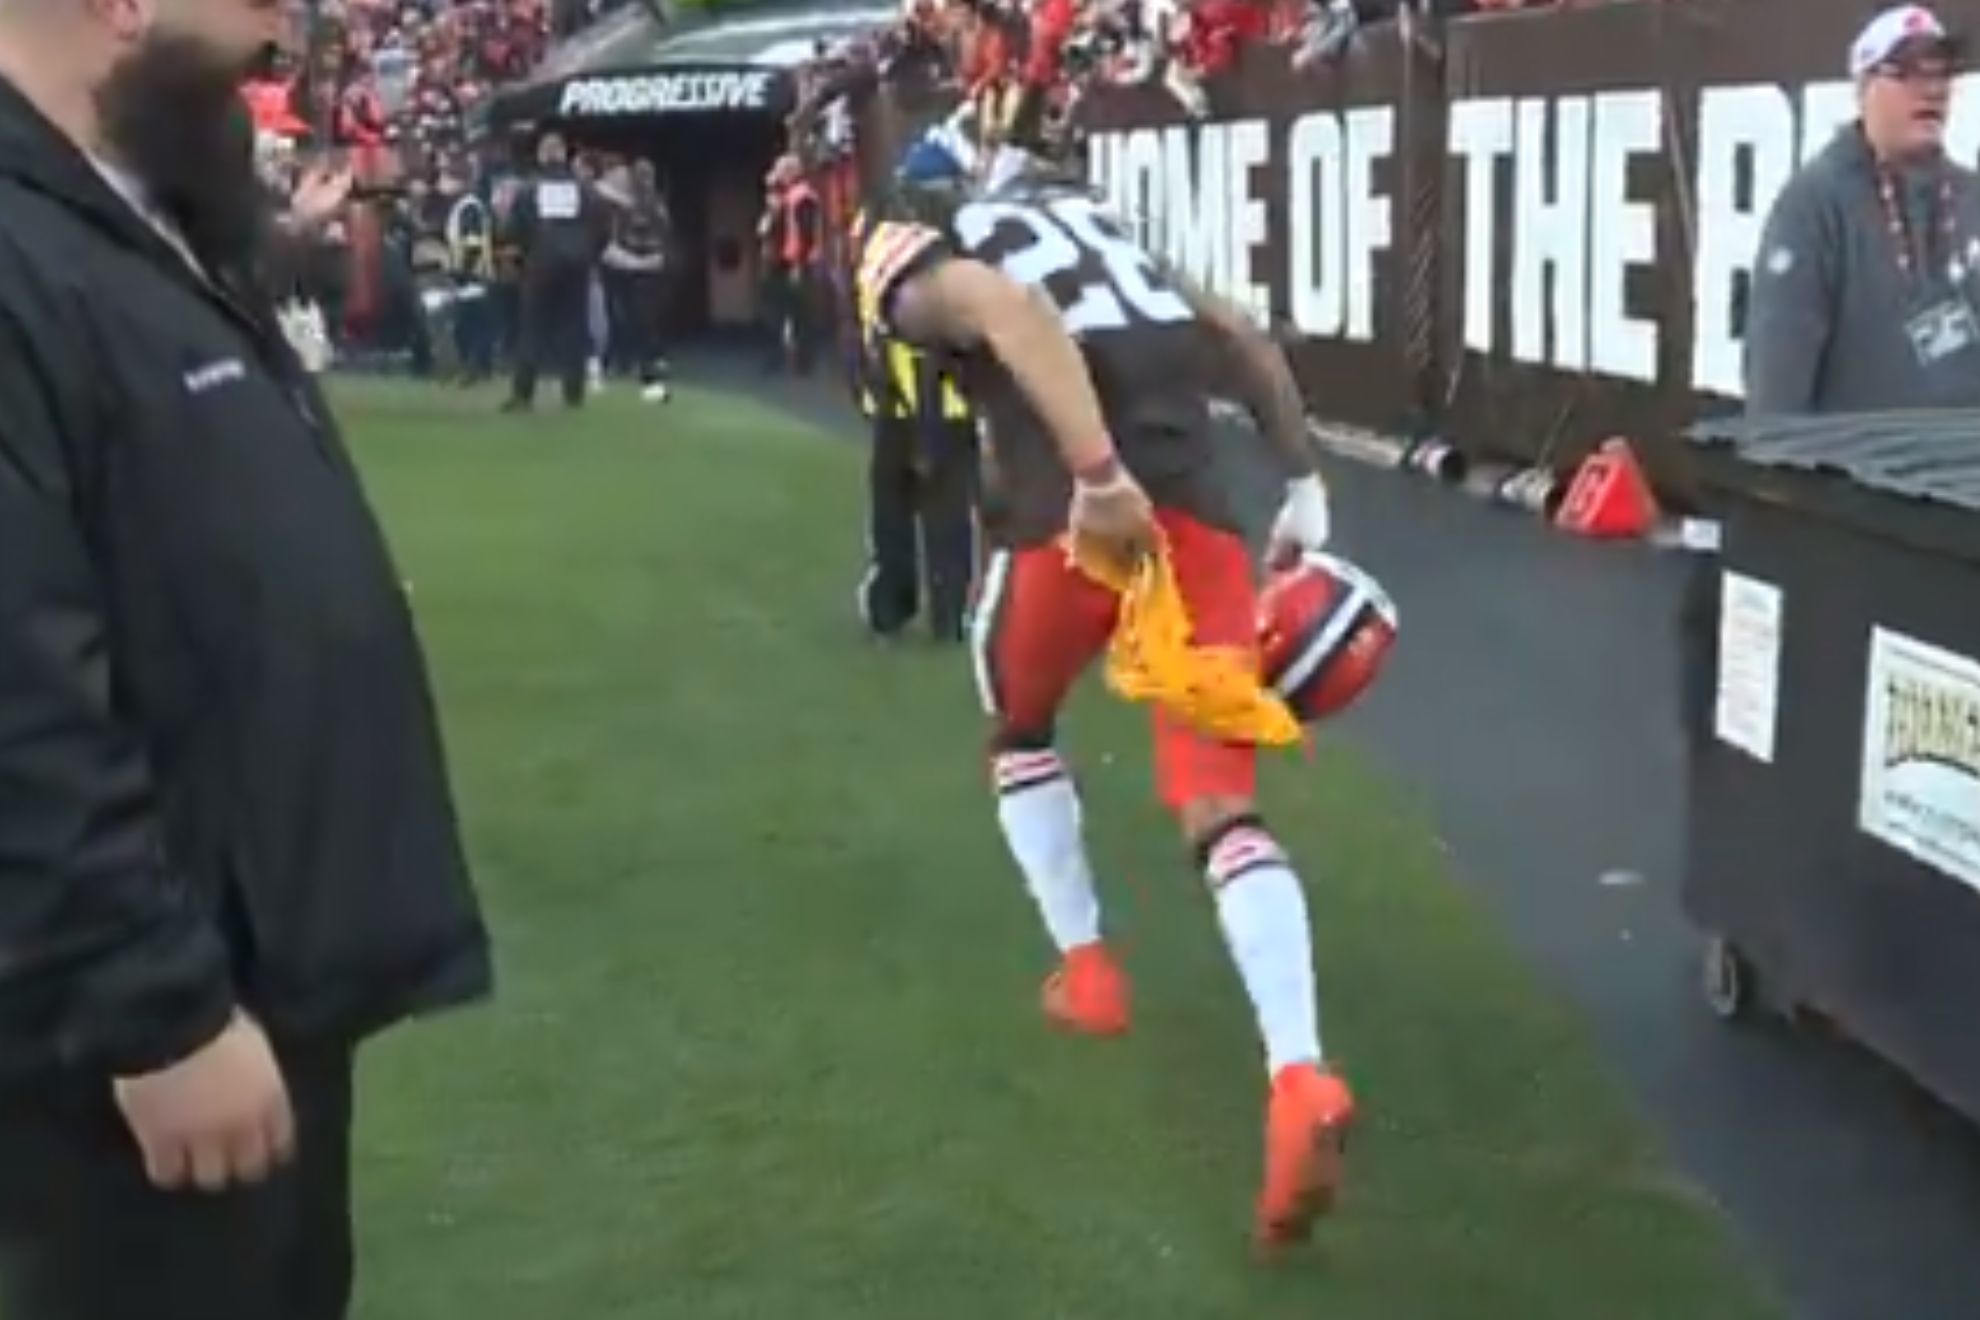 Browns player steals terrible towel from Steelers fan and uses it as toilet paper